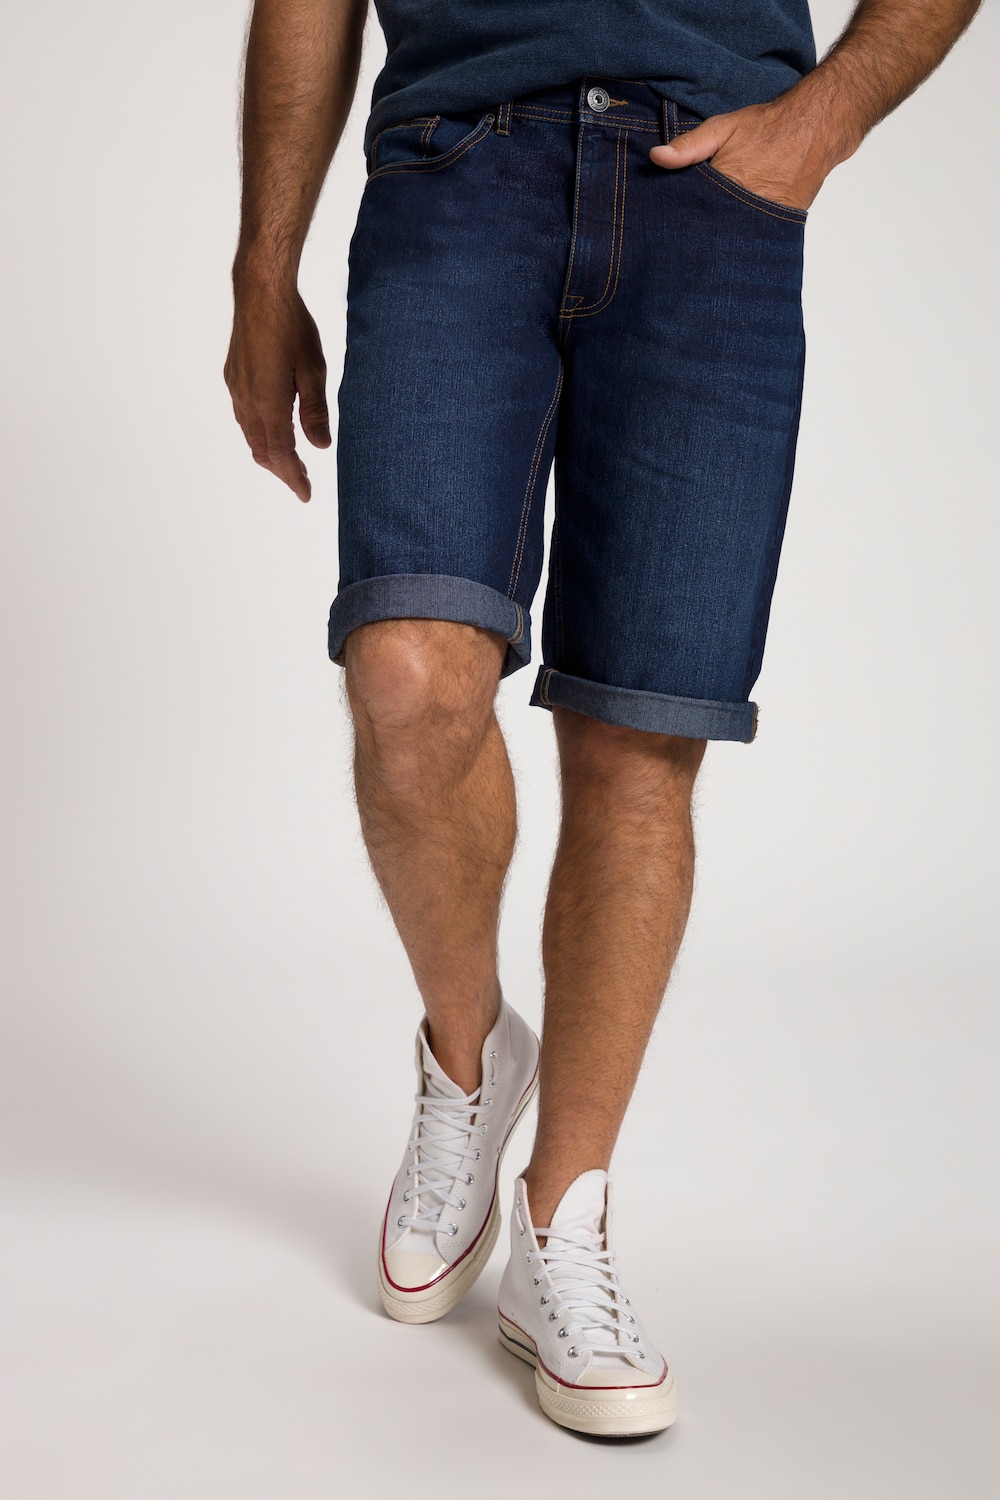 grandes tailles bermuda 5 poches. denim stretch - coupe regular fit, hommes, bleu, taille: 66, coton/polyester, jp1880